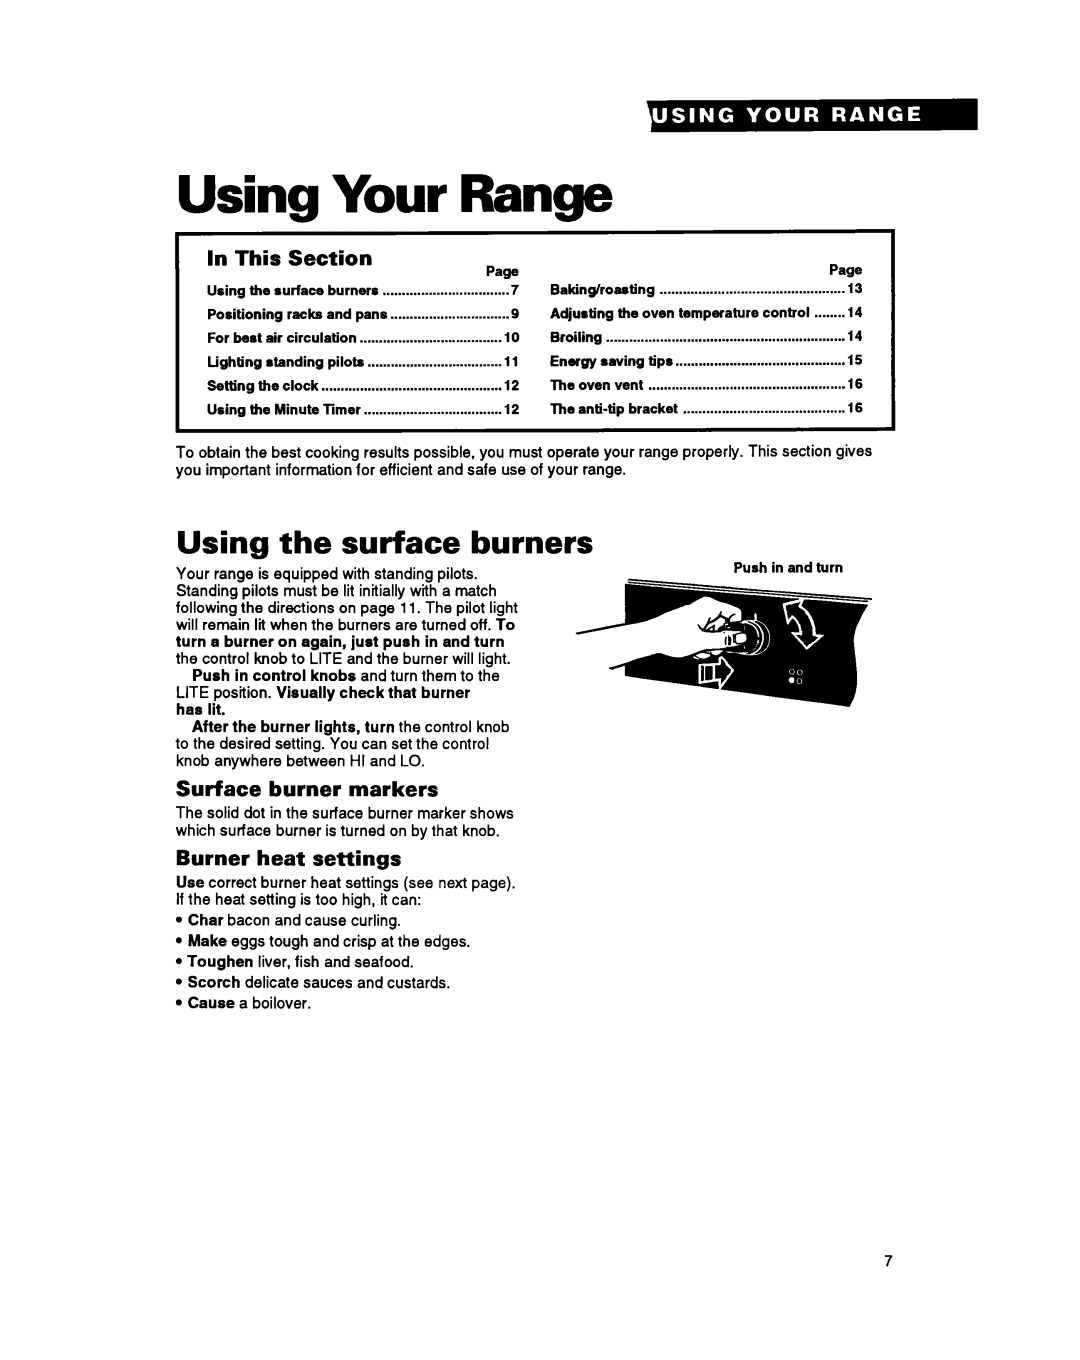 Whirlpool SF314PSY manual Using Your Range, surface, burners, This, Section, Page, Surface, markers, Burner, heat settings 